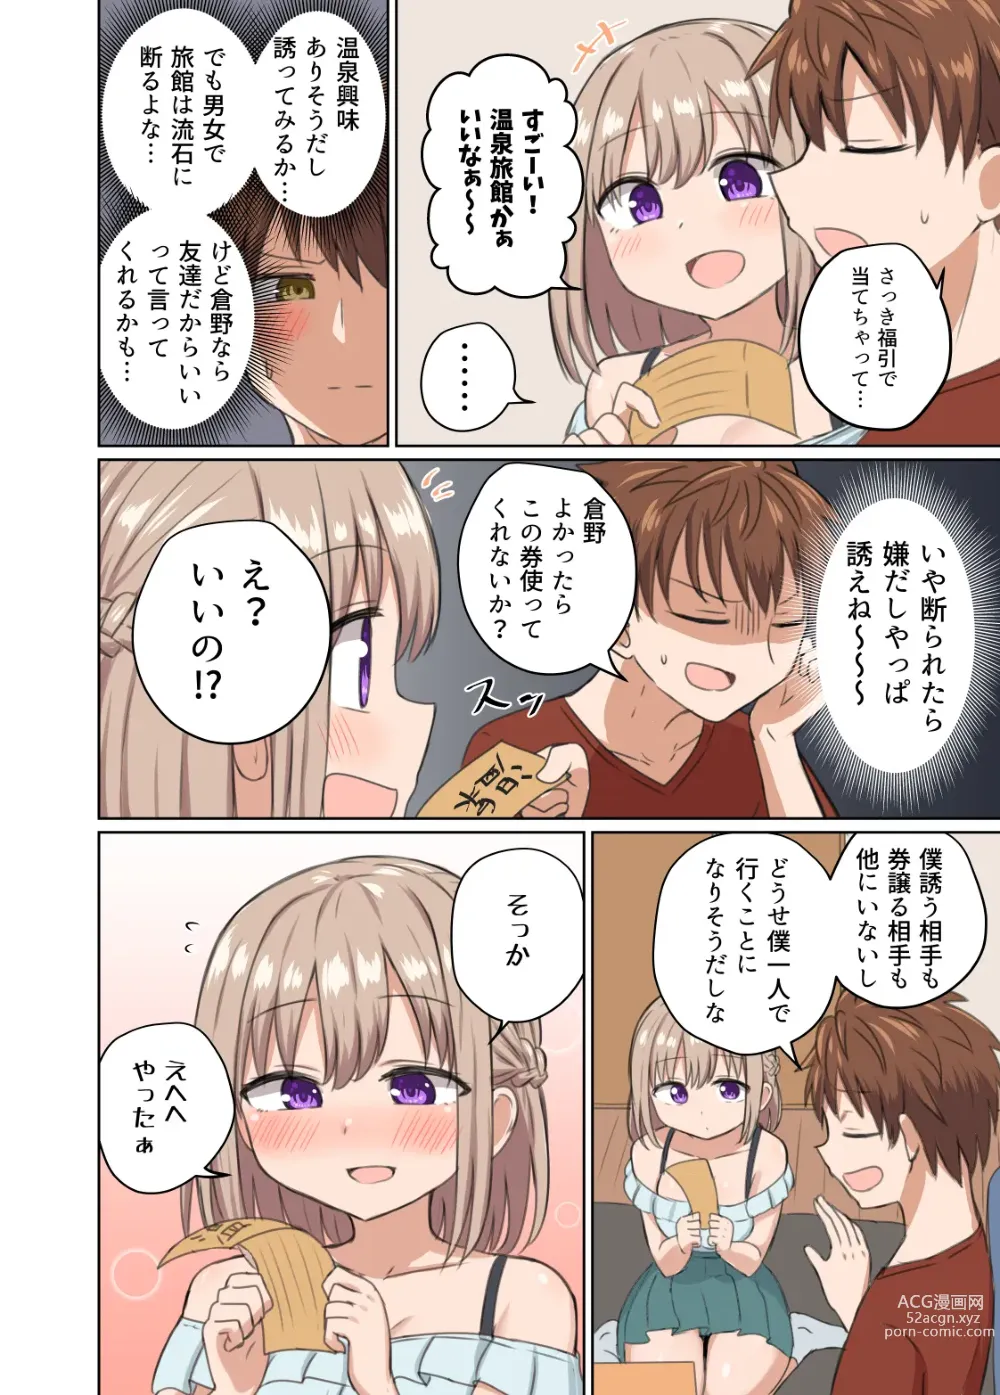 Page 24 of doujinshi Kyorikan Chikasugite Kuttsuichatta - side by side with you